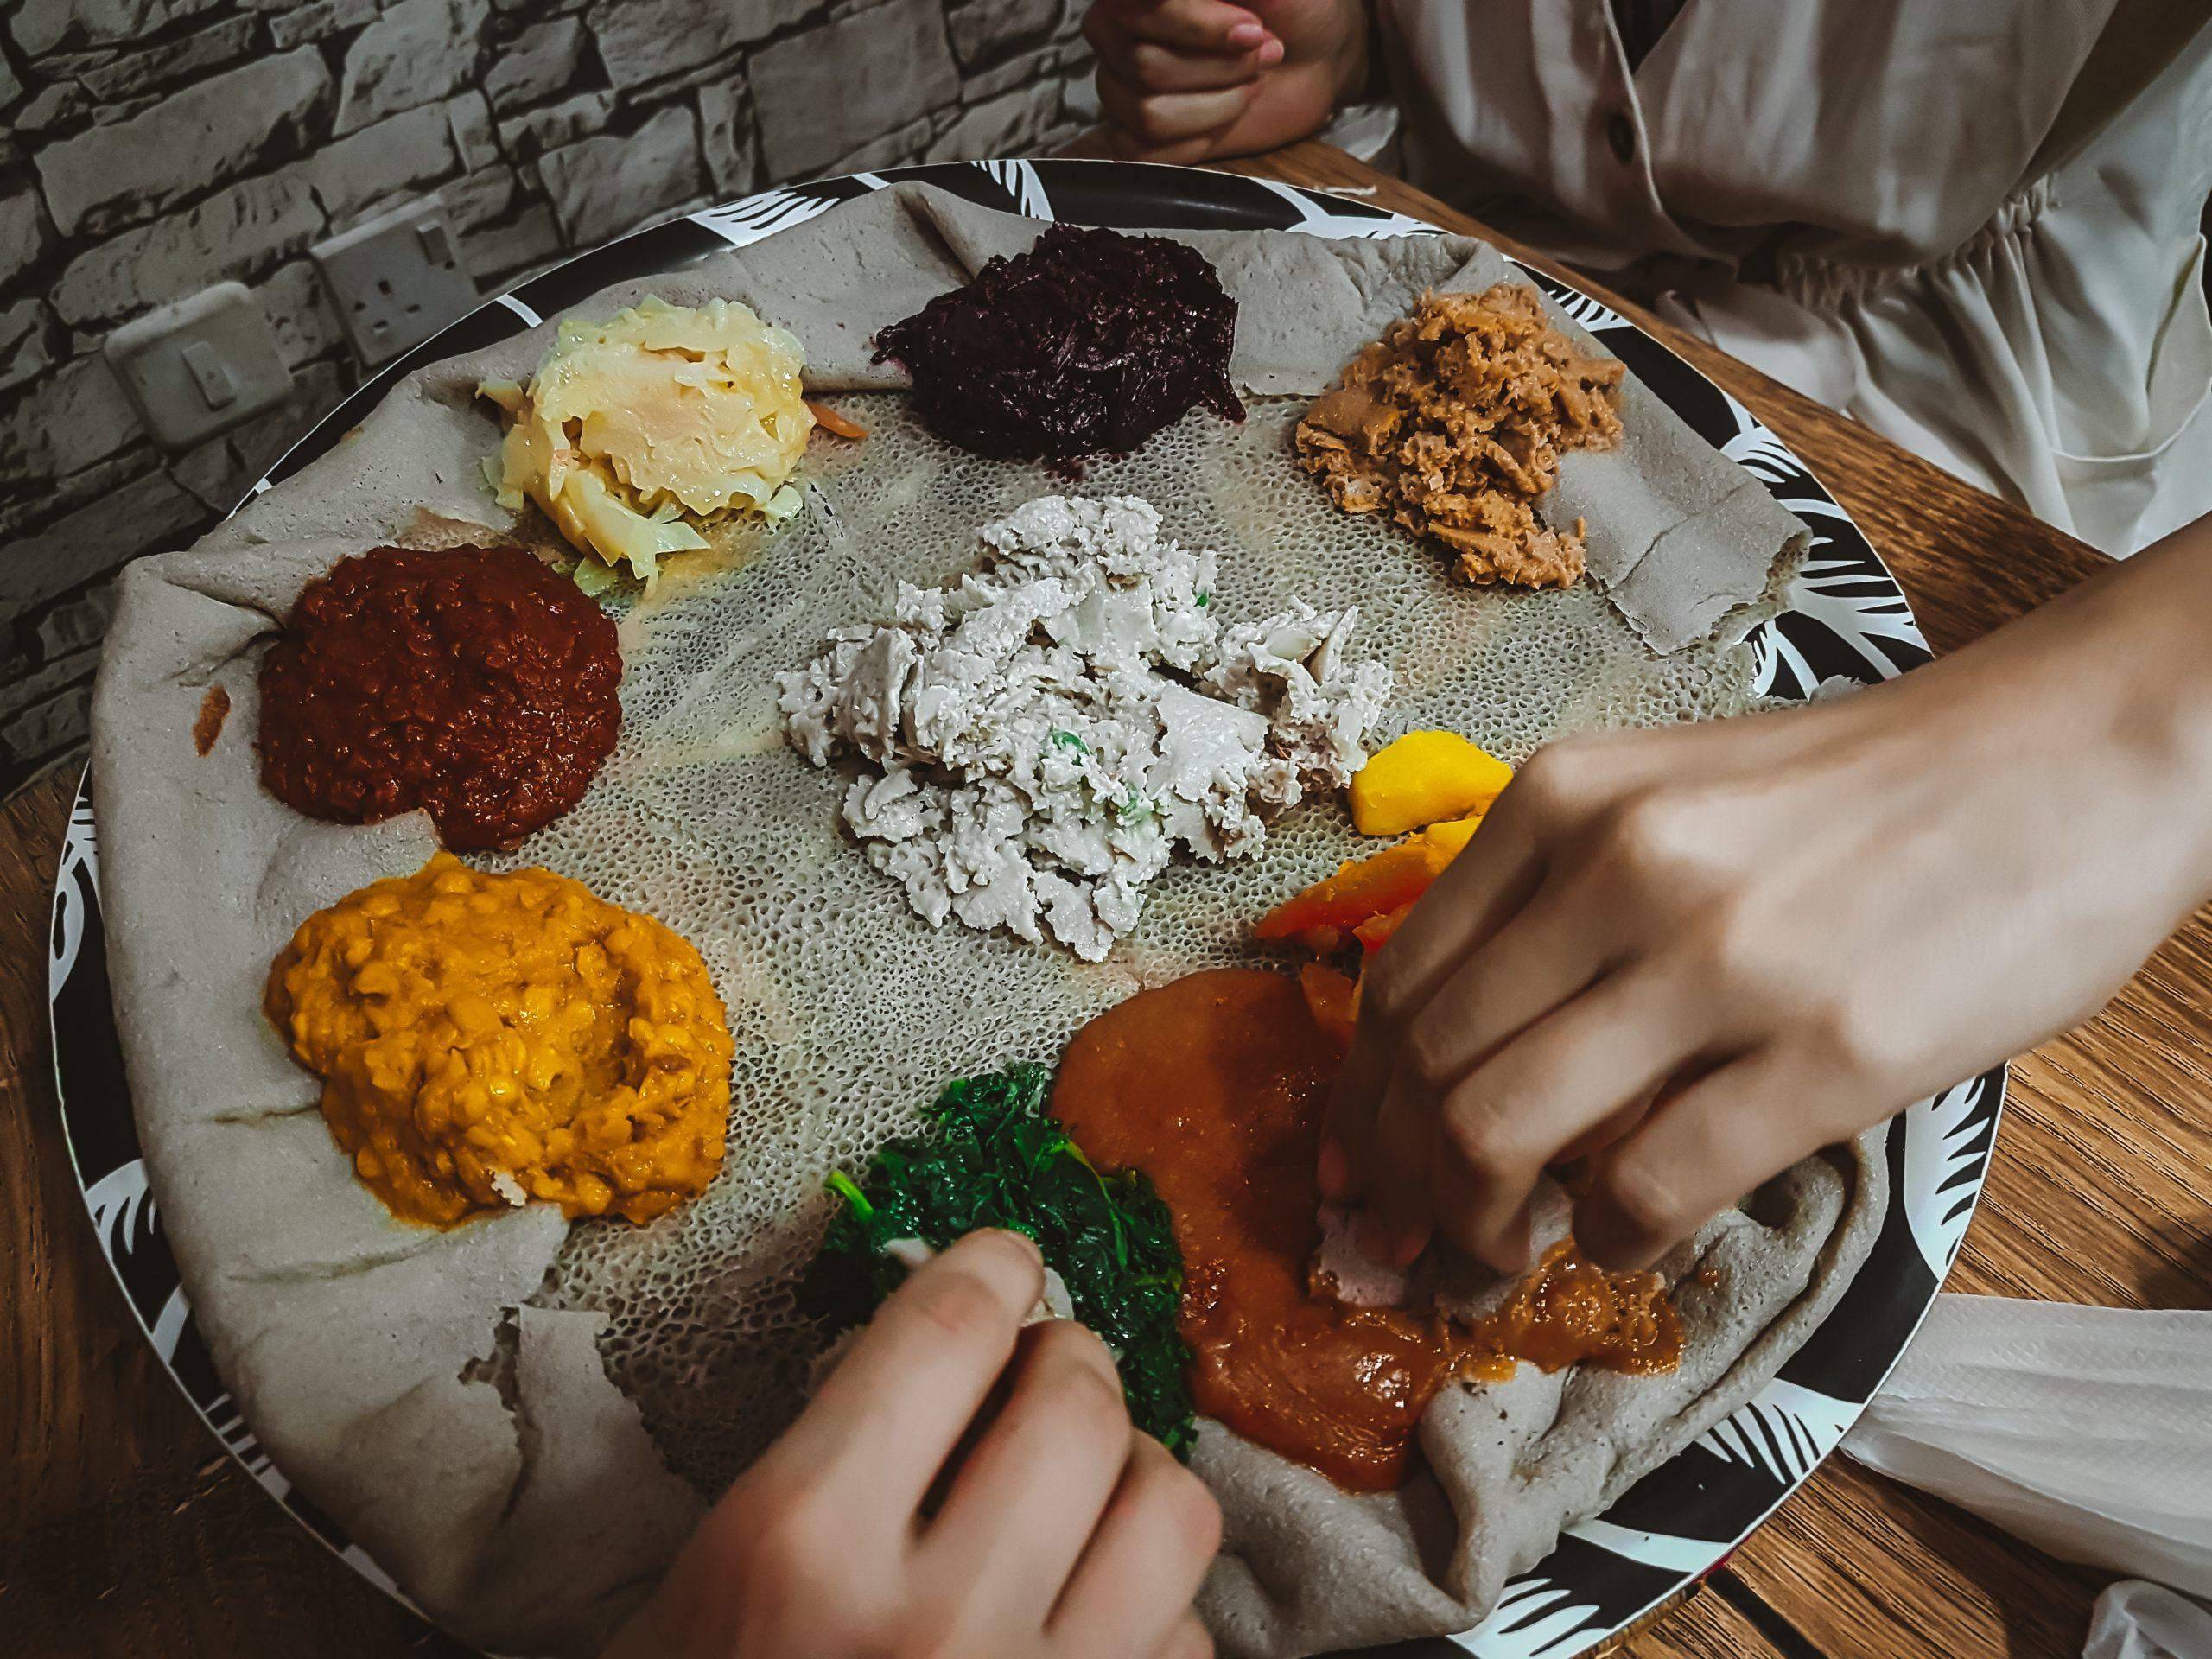 Two,Hands,Take,Food,From,Ethiopian,Food,Plate,With,Colorful